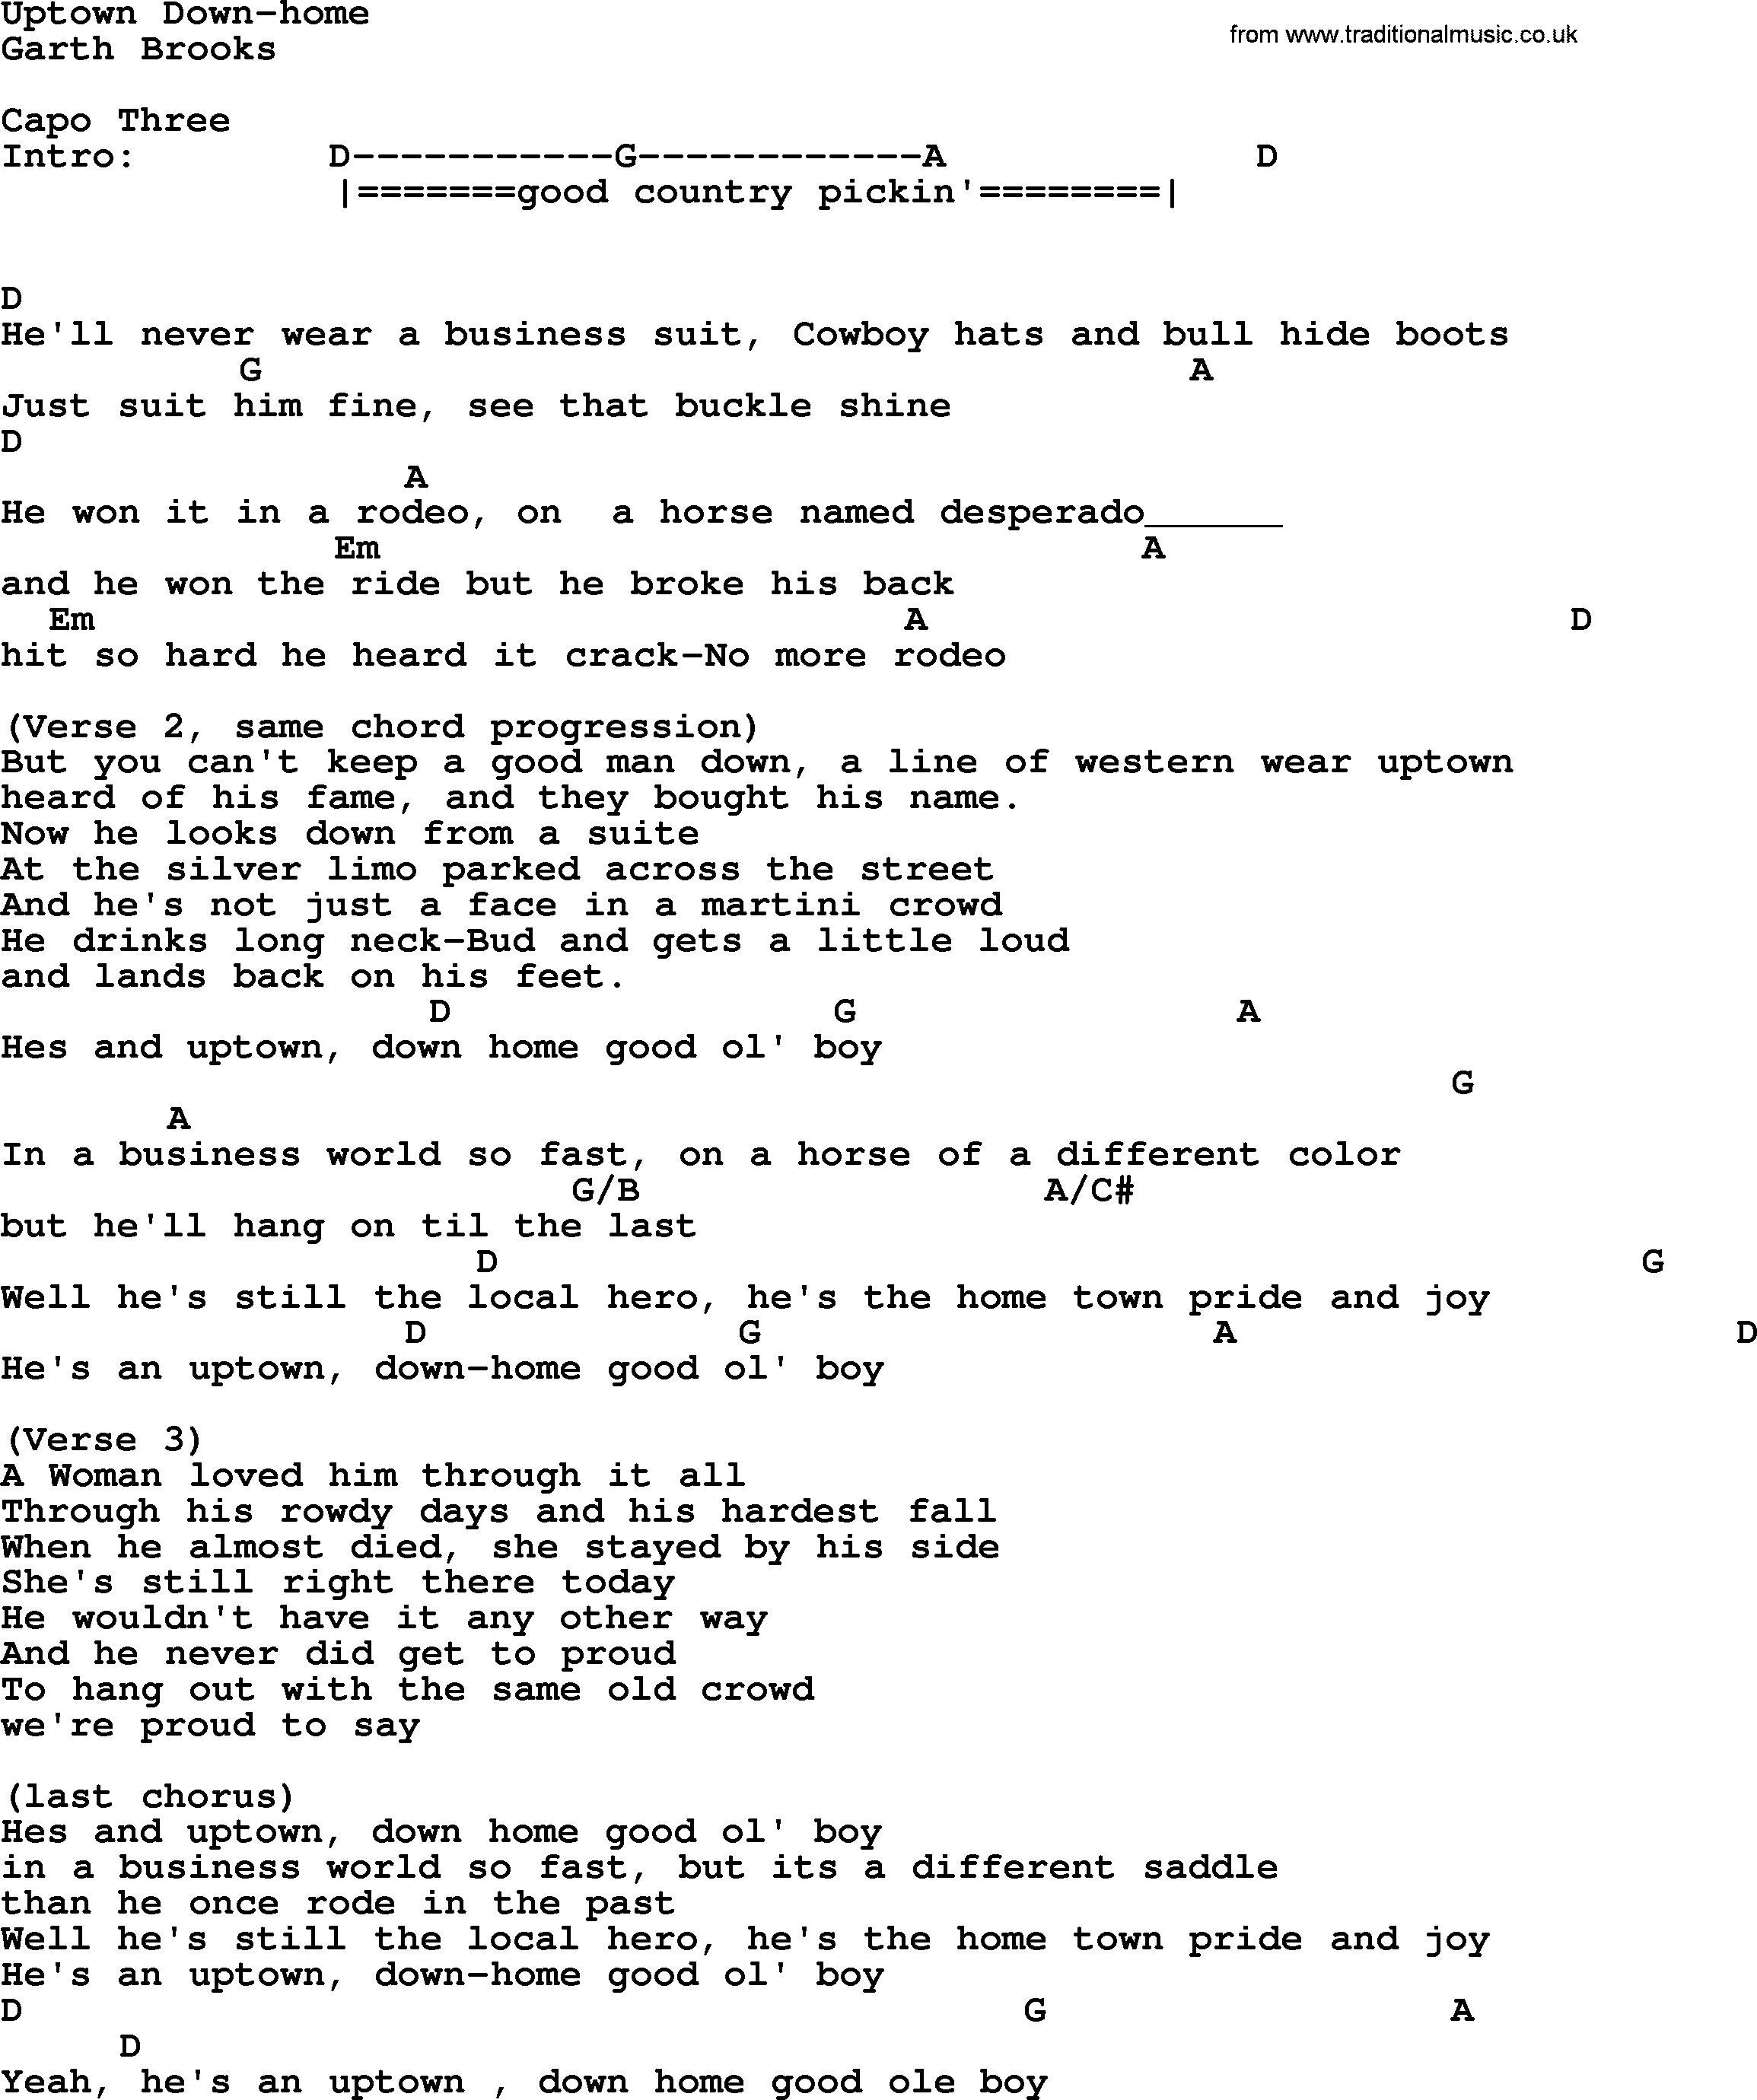 Garth Brooks song: Uptown Down-home, lyrics and chords